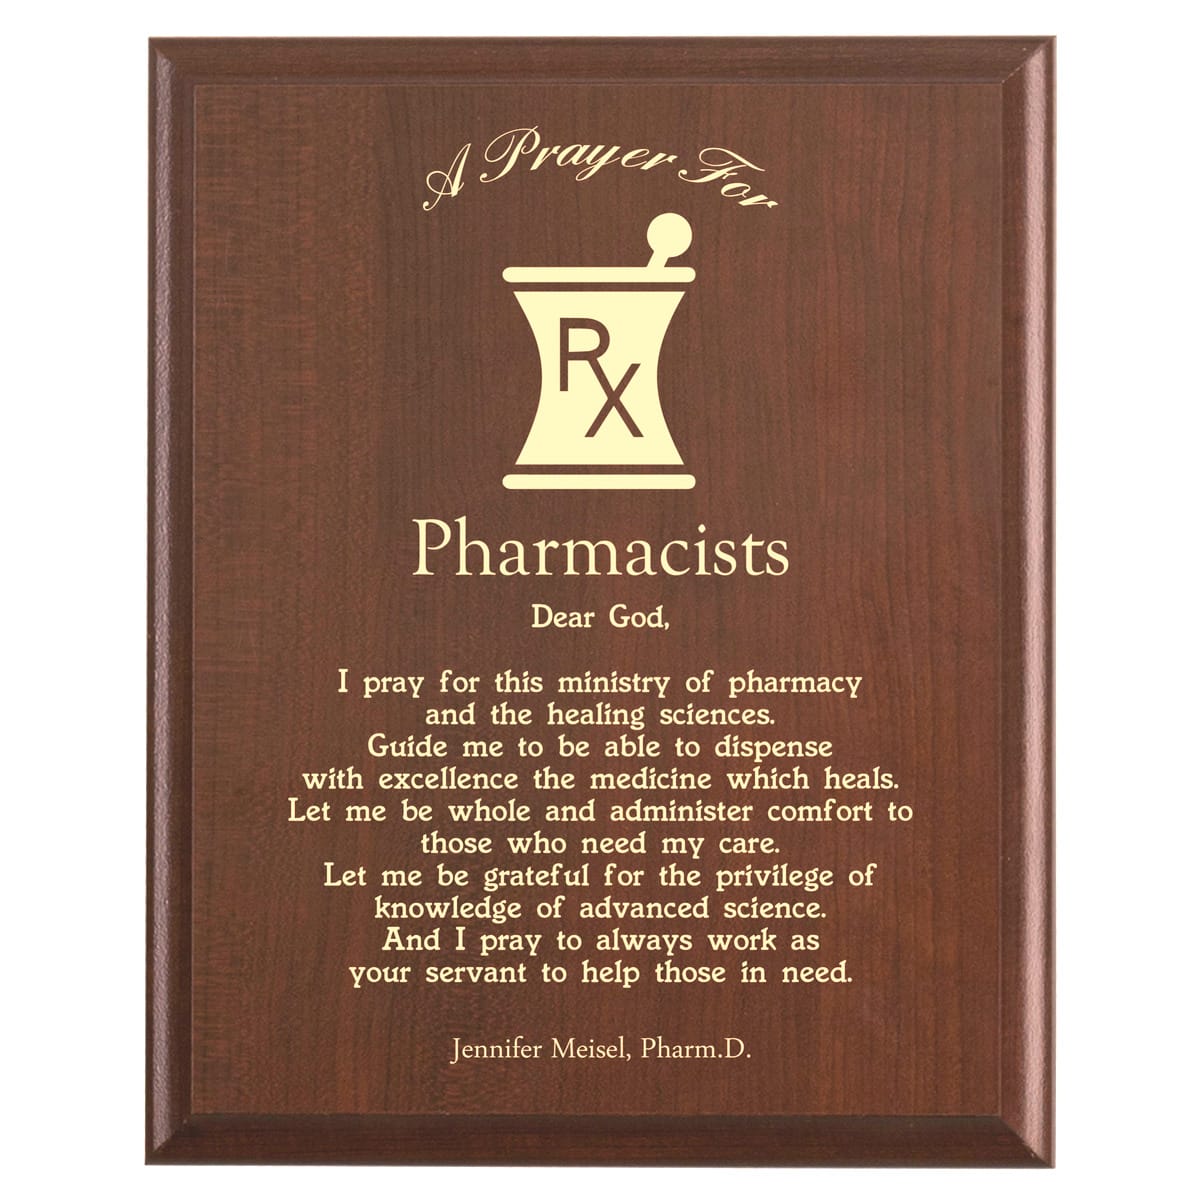 Plaque photo: Pharmacists Prayer Plaque design with free personalization. Wood style finish with customized text.